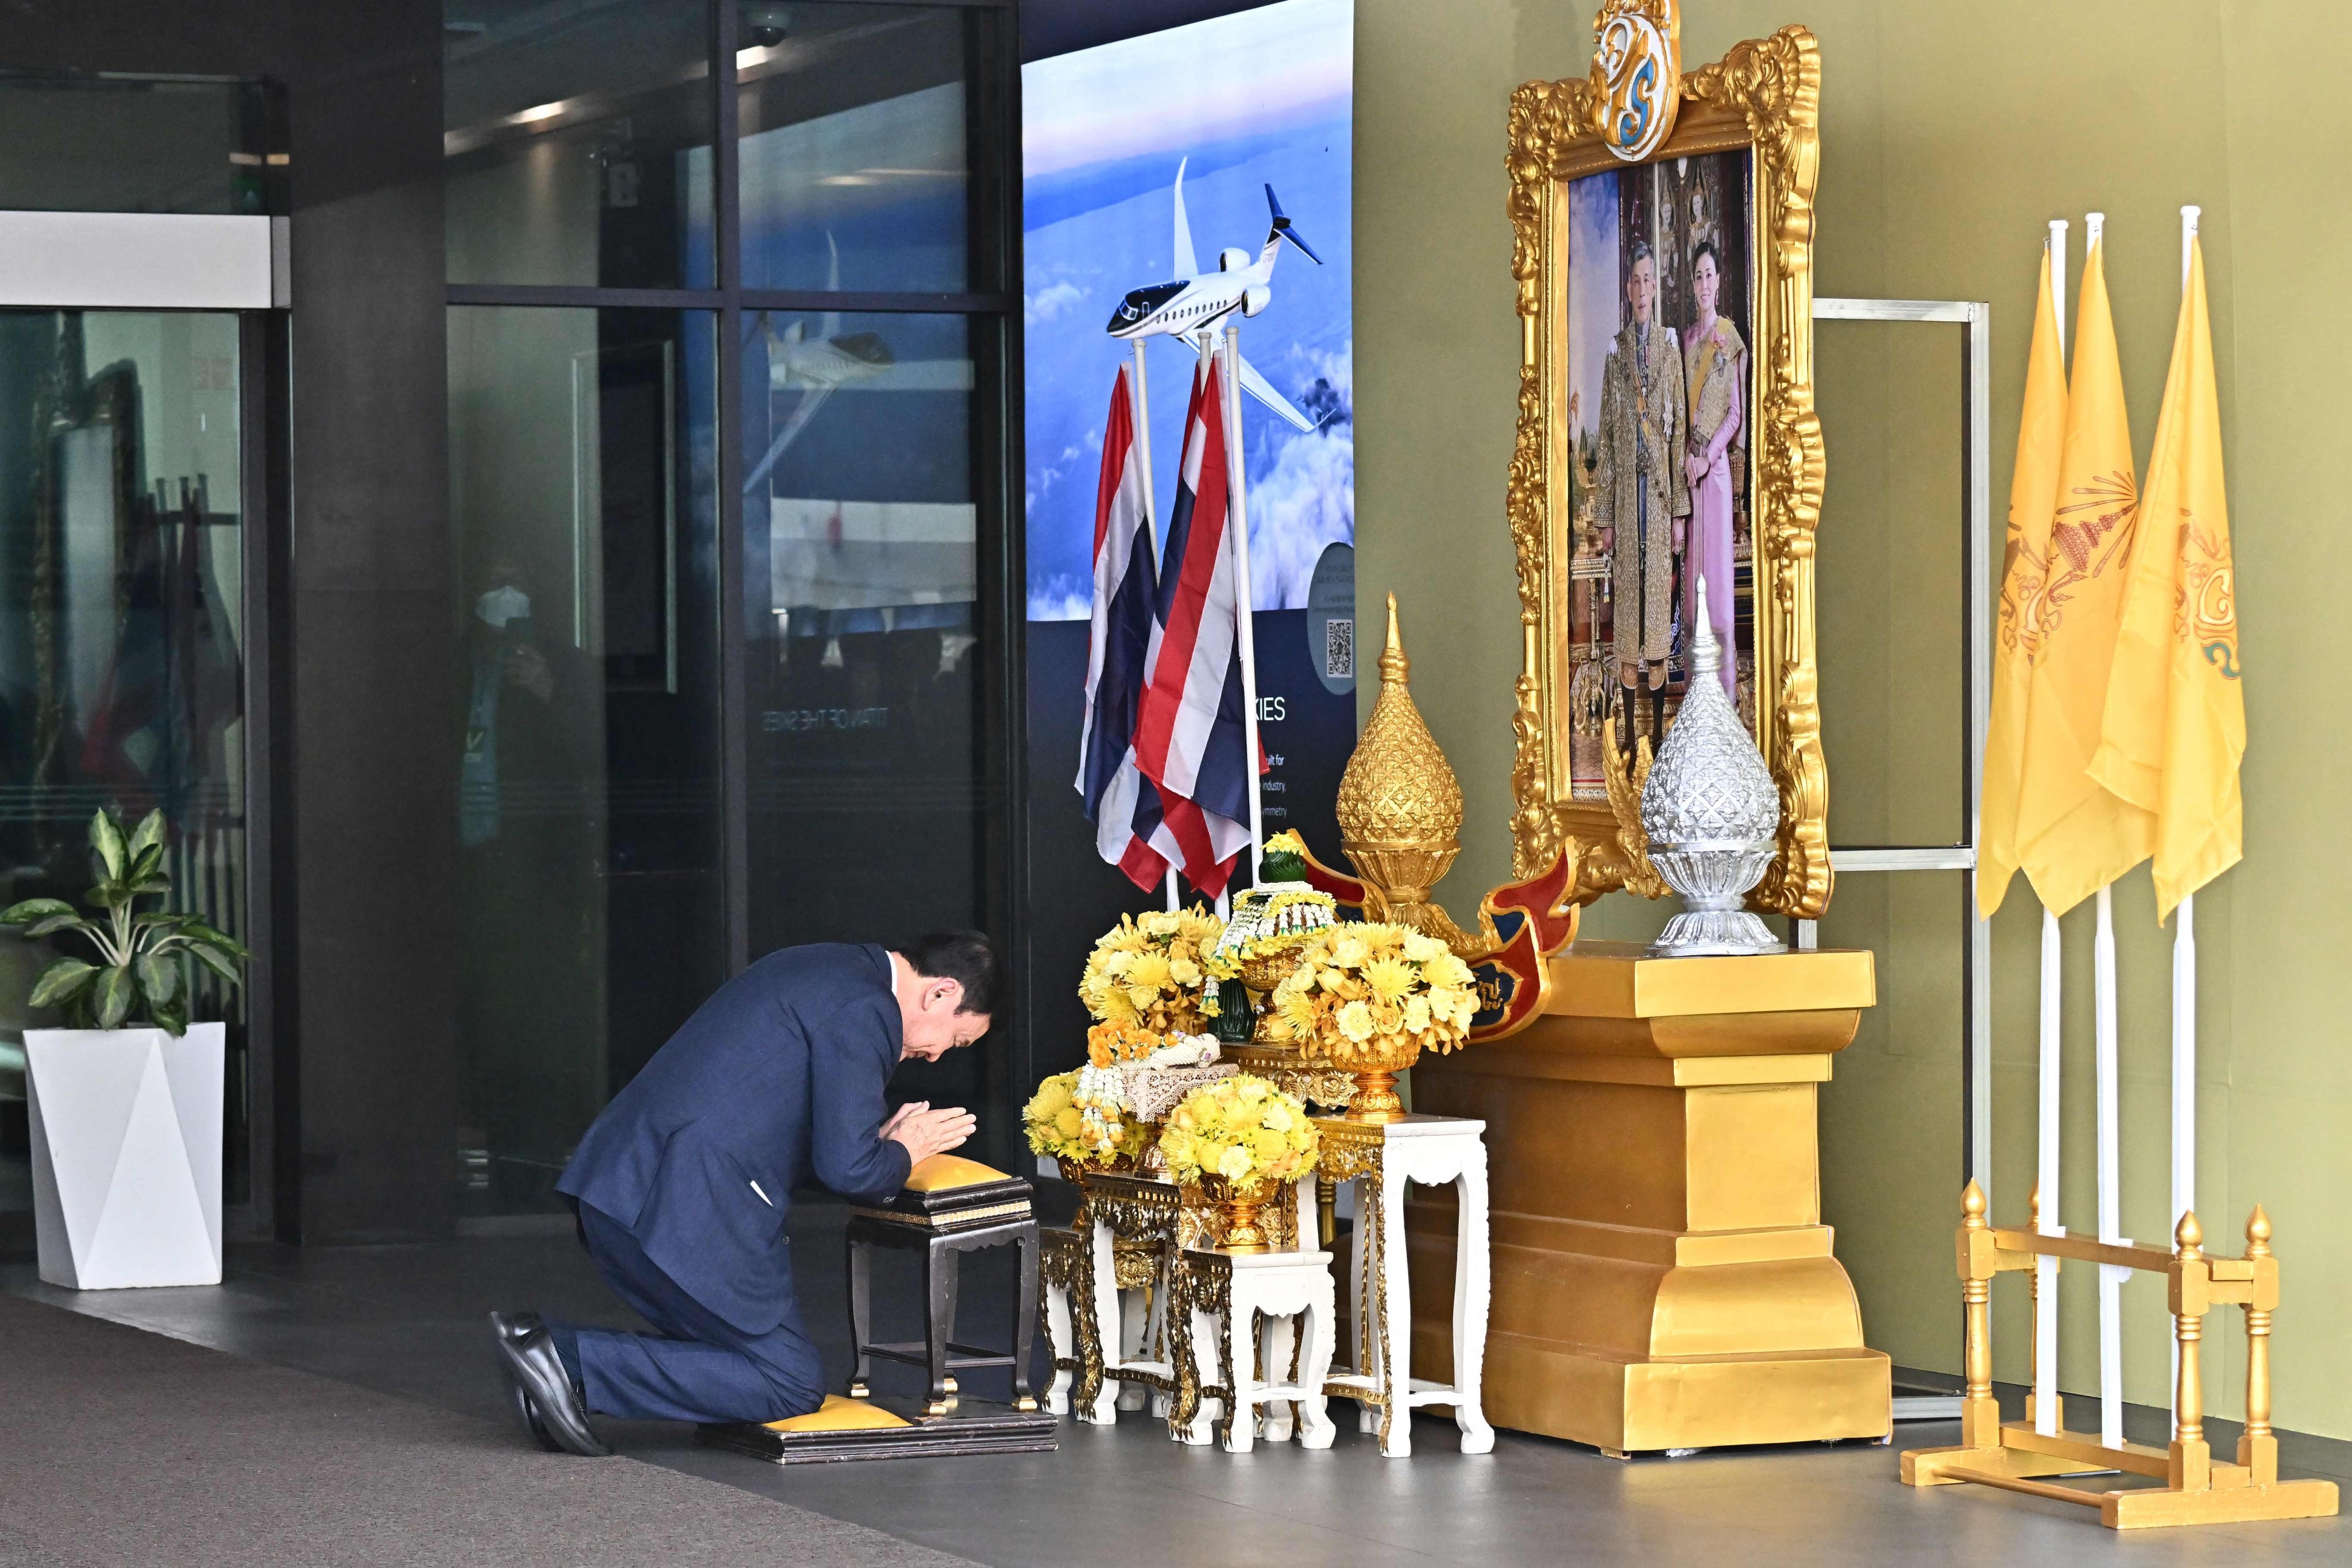 Thaksin Shinawatra bows in homage to the king’s portrait after landing at Bangkok’s Don Mueang airport on August 22. Photo: AFP 